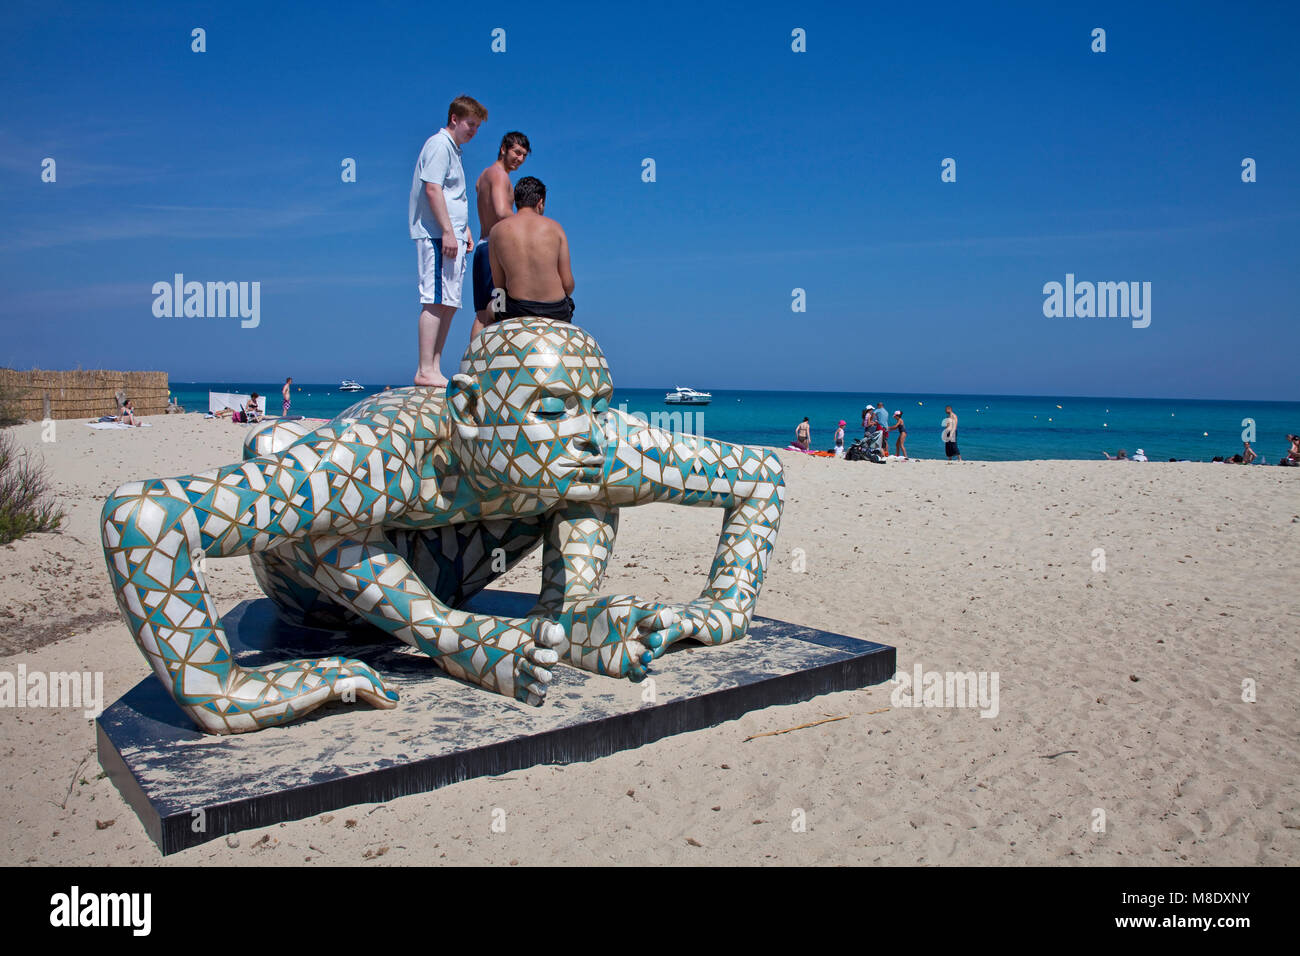 Young people standing on a Rabarama sculpture at Pampelonne beach, popular beach at Saint-Tropez, french riviera, South France, Cote d'Azur, France Stock Photo